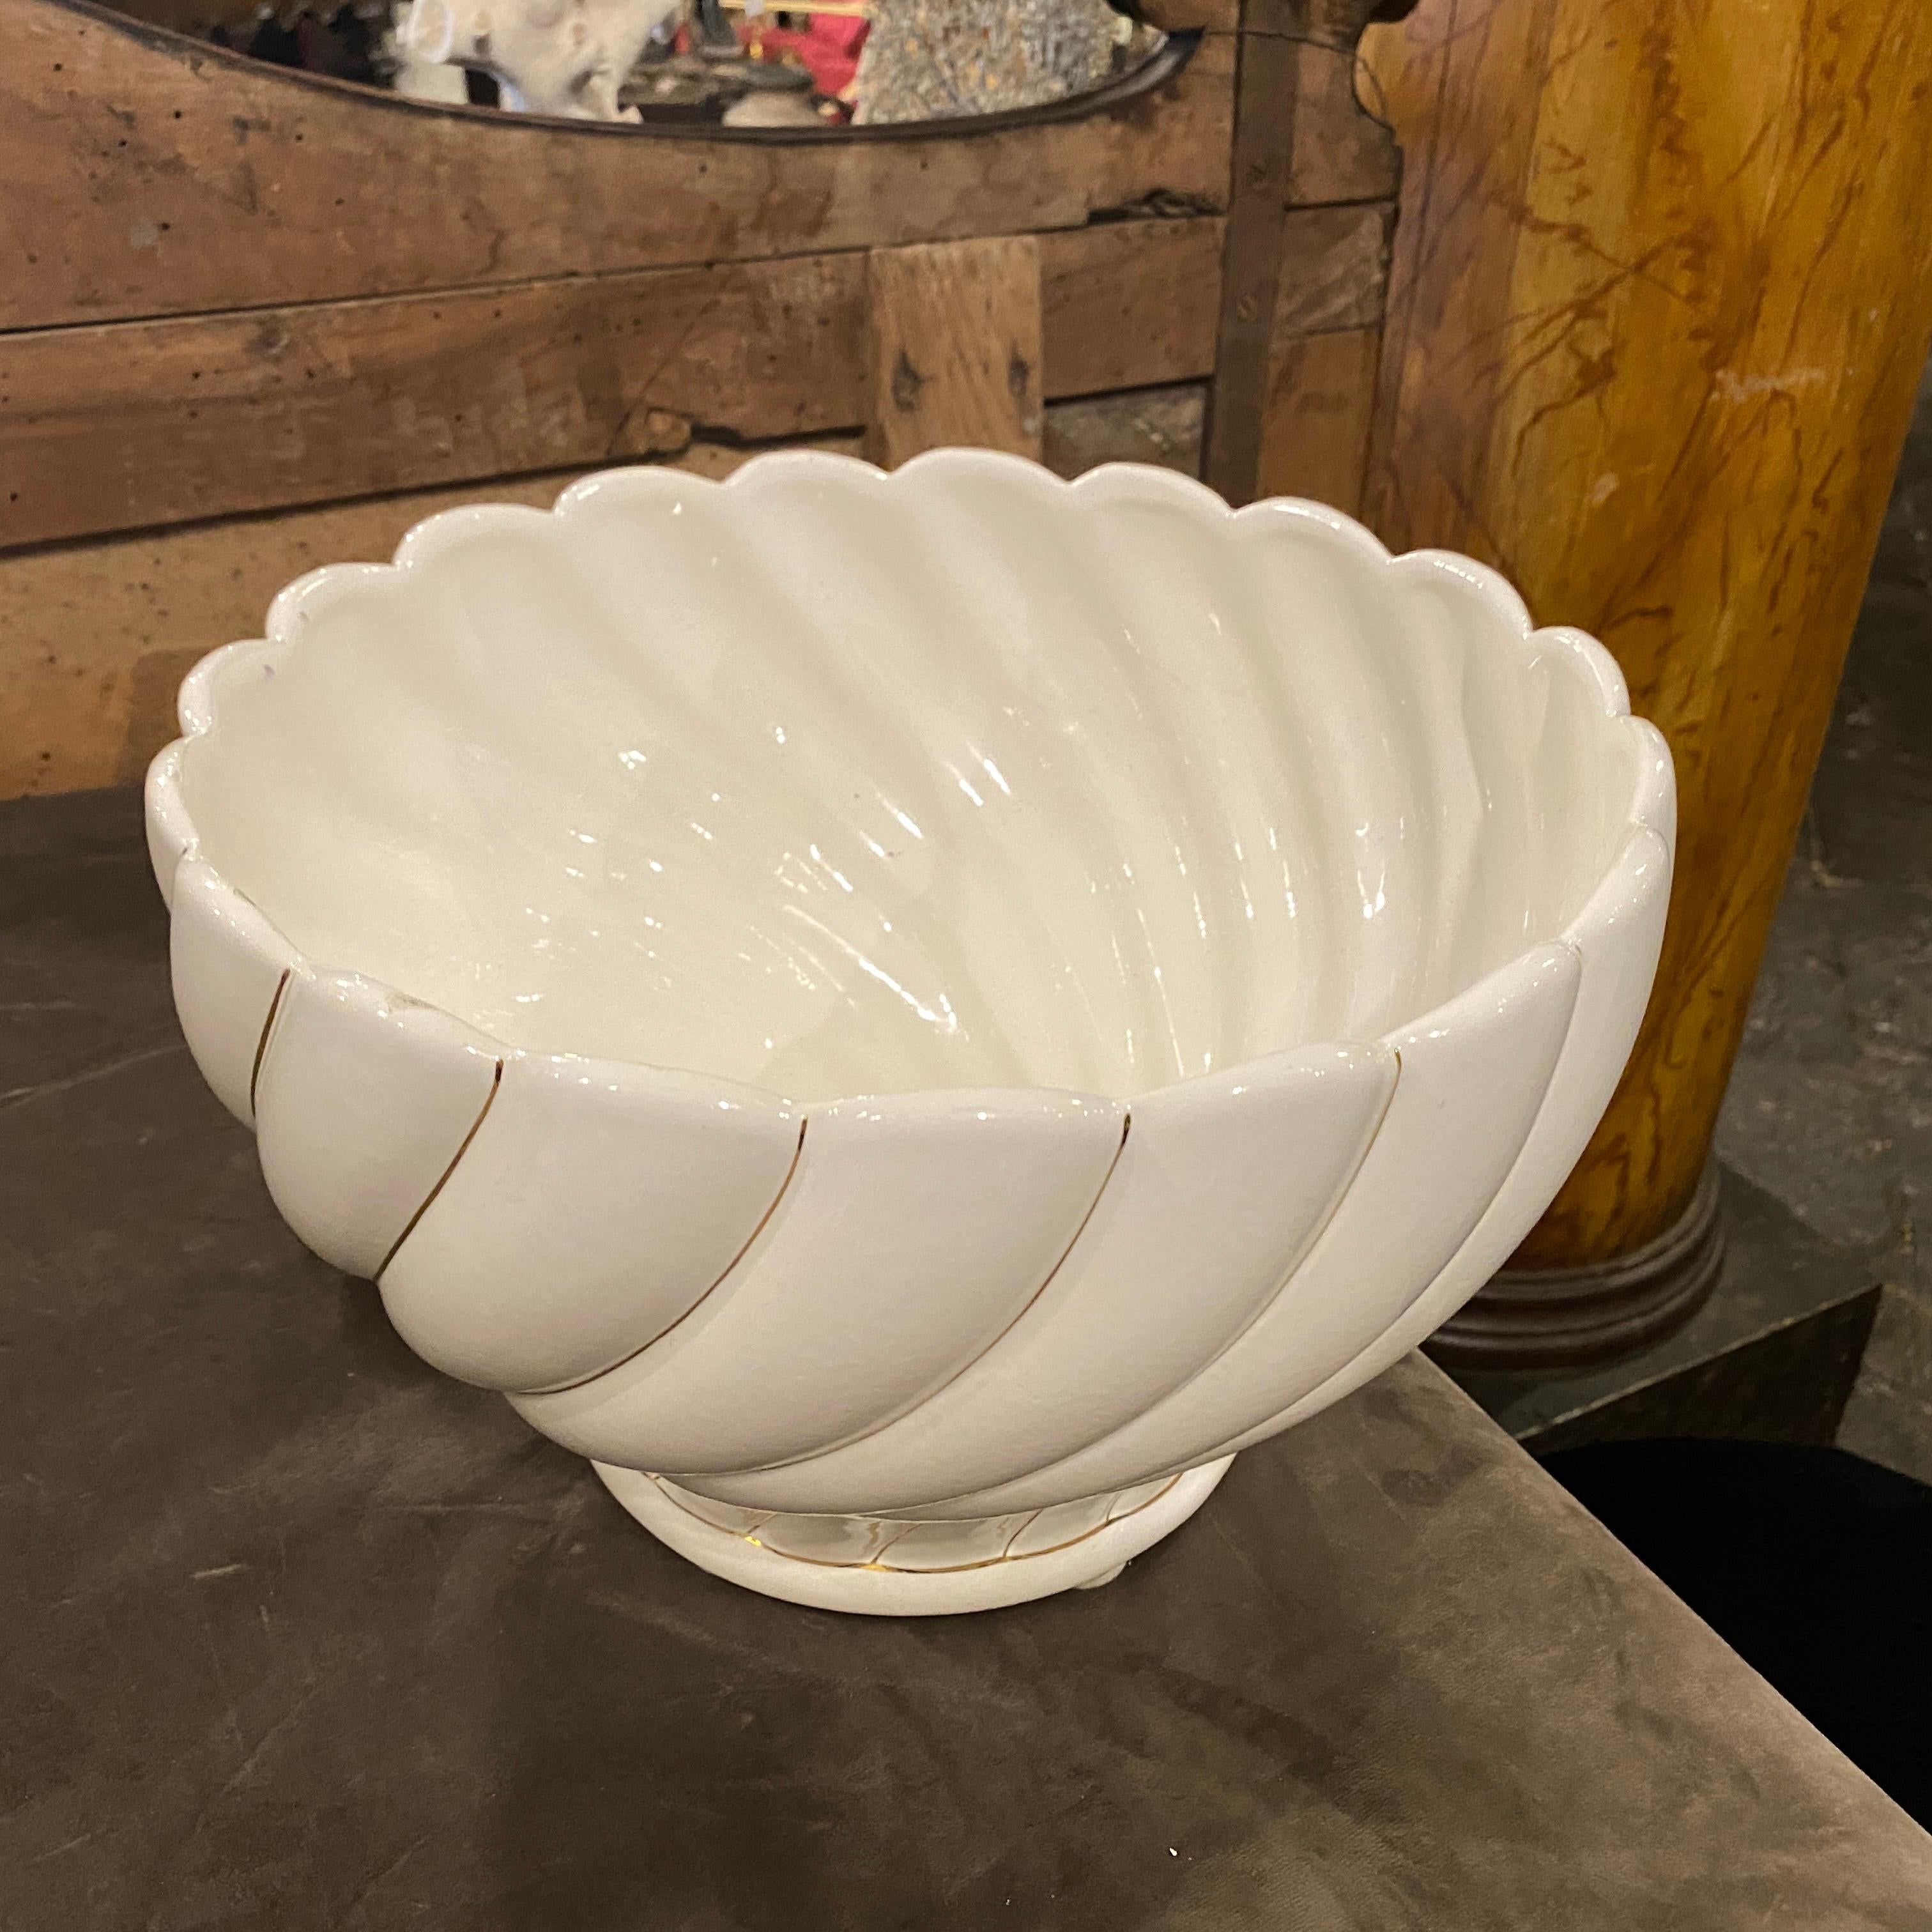 It's a stylish white and gold porcelain centerpiece designed and manufactured in Italy in the Seventies by Tommaso Barbi, marked on the bottom. The item is in good conditions. The bowl embodies the era's design principles, combining simplicity with